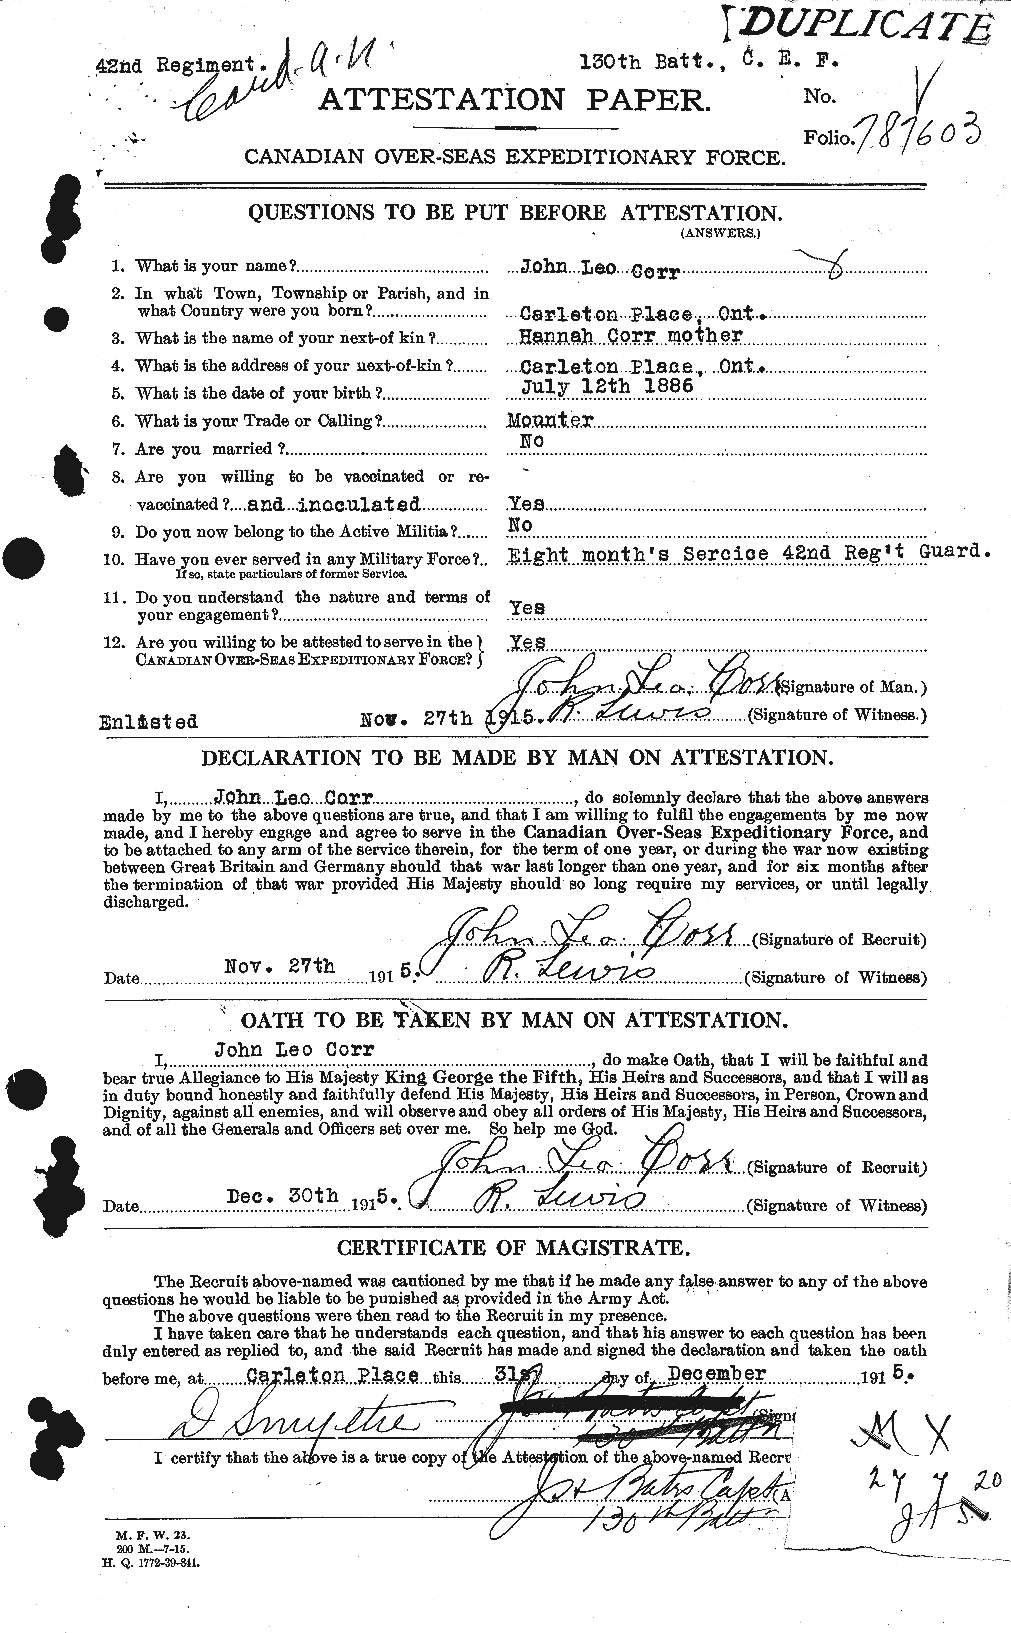 Personnel Records of the First World War - CEF 055006a